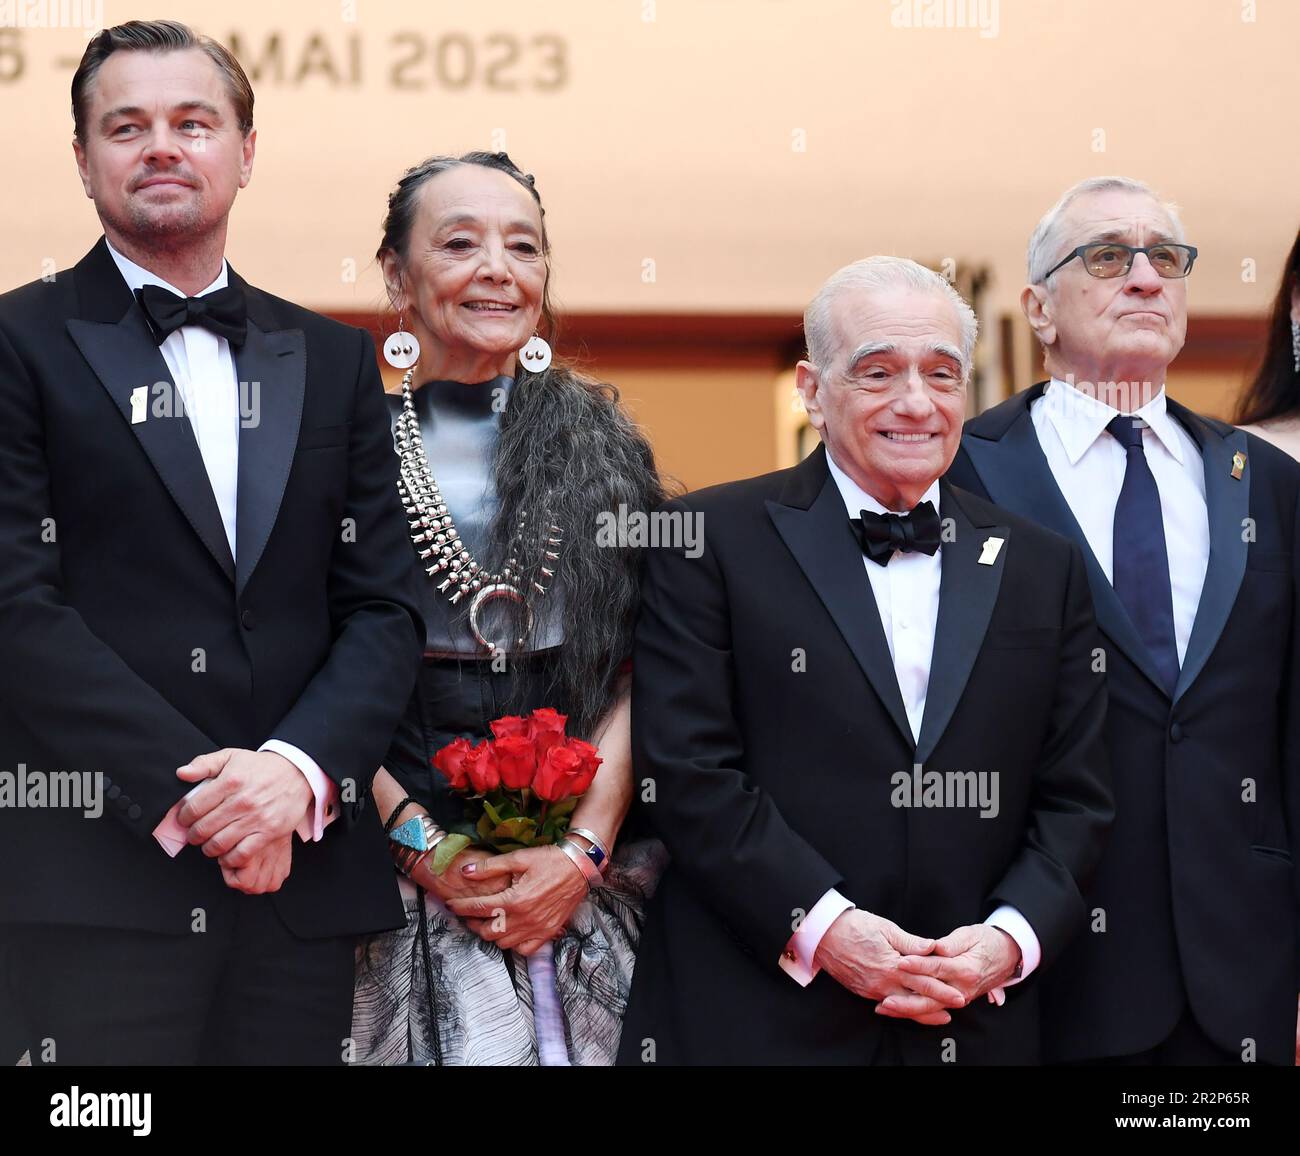 Cannes, France. 20th May, 2023. American actors Leonardo DiCaprio, Robert DeNiro, Canadian actress Tantoo Cardinal and director Martin Scorsese attend the premiere of Killers Of The Flower Moon at the 76th Cannes Film Festival at Palais des Festivals in Cannes, France on Saturday, May 20, 2023. Photo by Rune Hellestad/ Credit: UPI/Alamy Live News Stock Photo